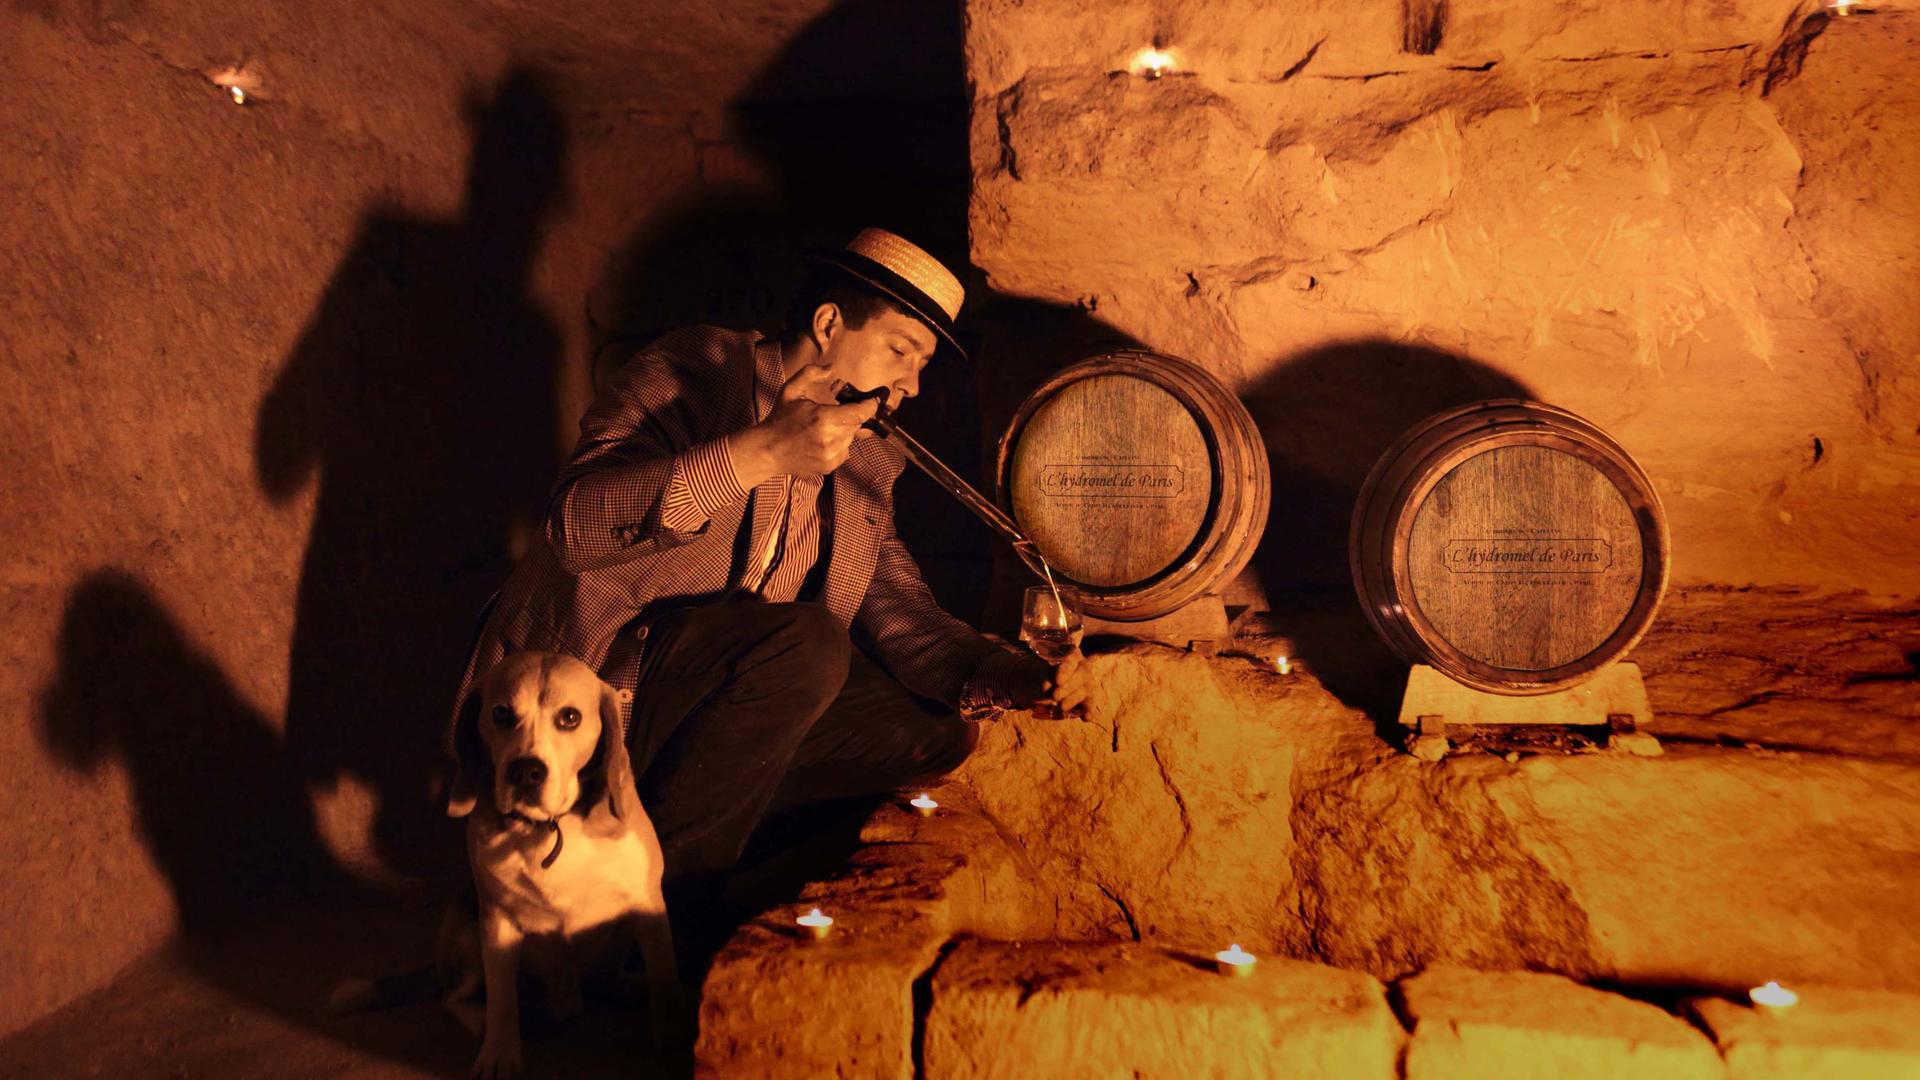 Audric de Campeau pours a glass of mead in the Paris catacombs with his dog, Filou.